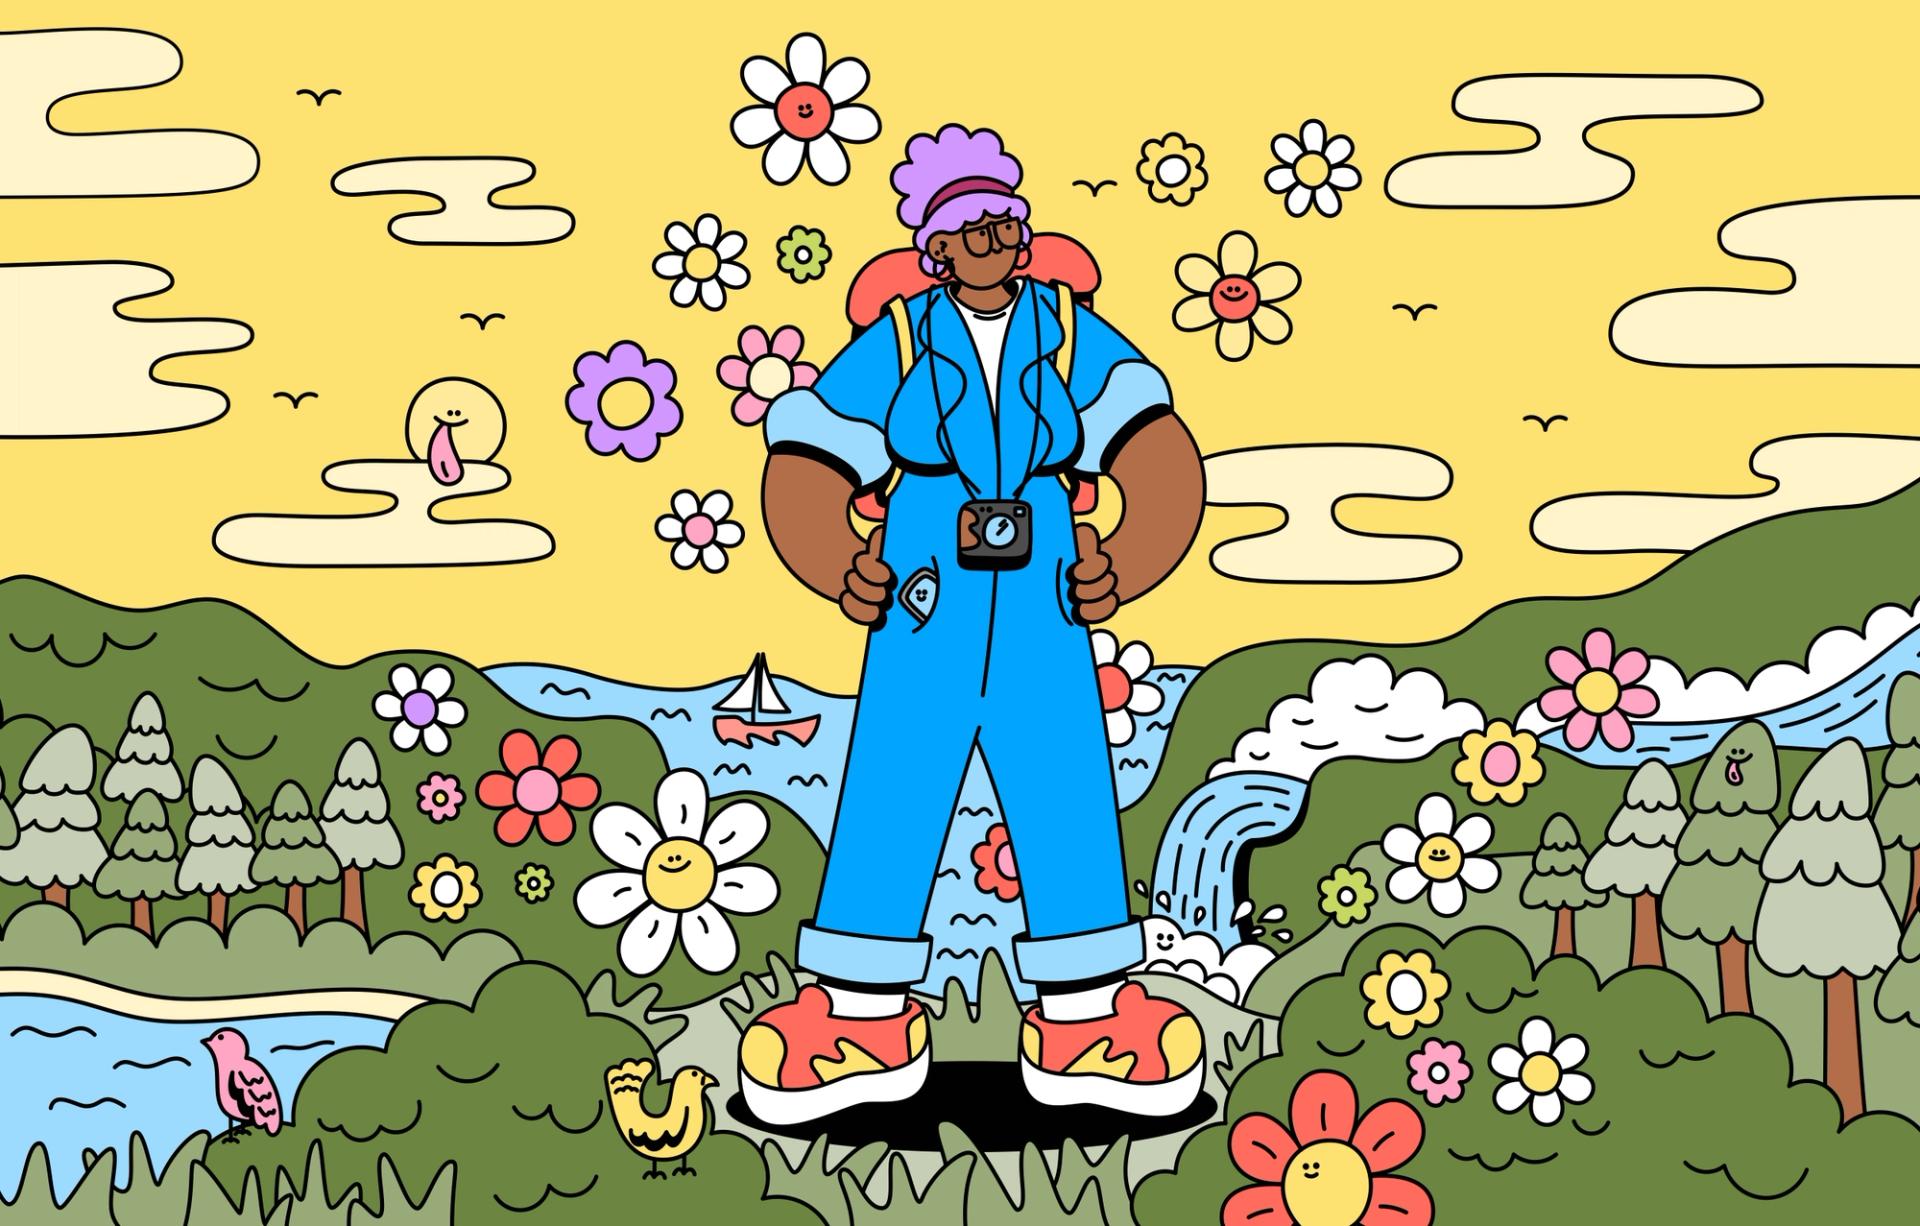 Bespecled black woman with purple hair and bright blue dungarees stands in the middle of a valley. She's surrounded by bright skies, smiling flowers and birds in a cheerful cartoon scene created by Luke McConkey